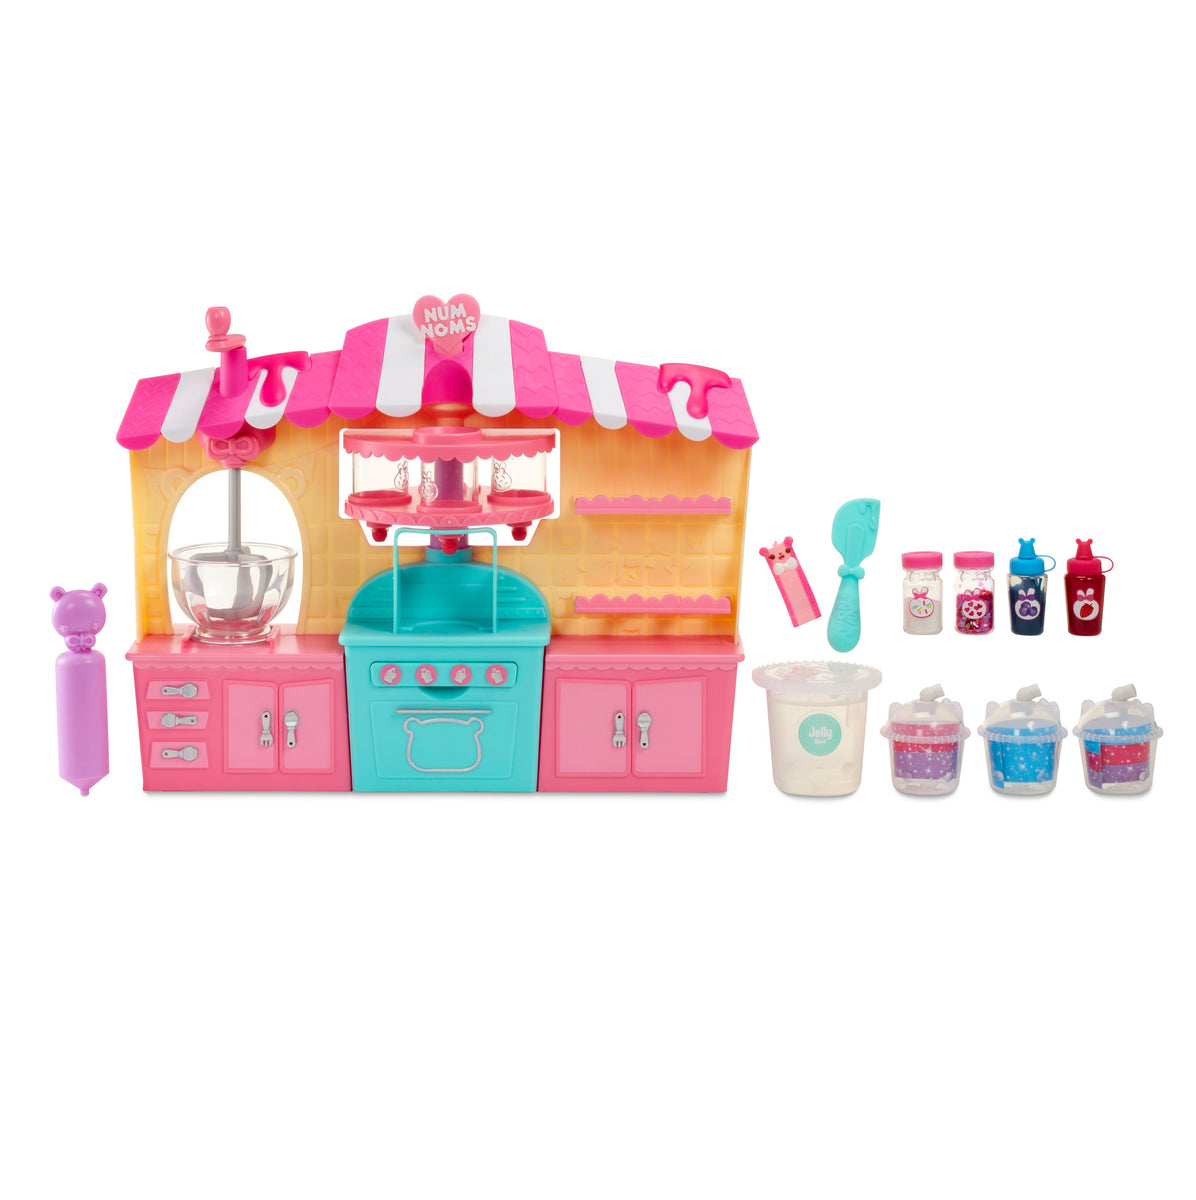 Num Noms Snackables Silly Shakes Slime Maker Playset Kitchen Only